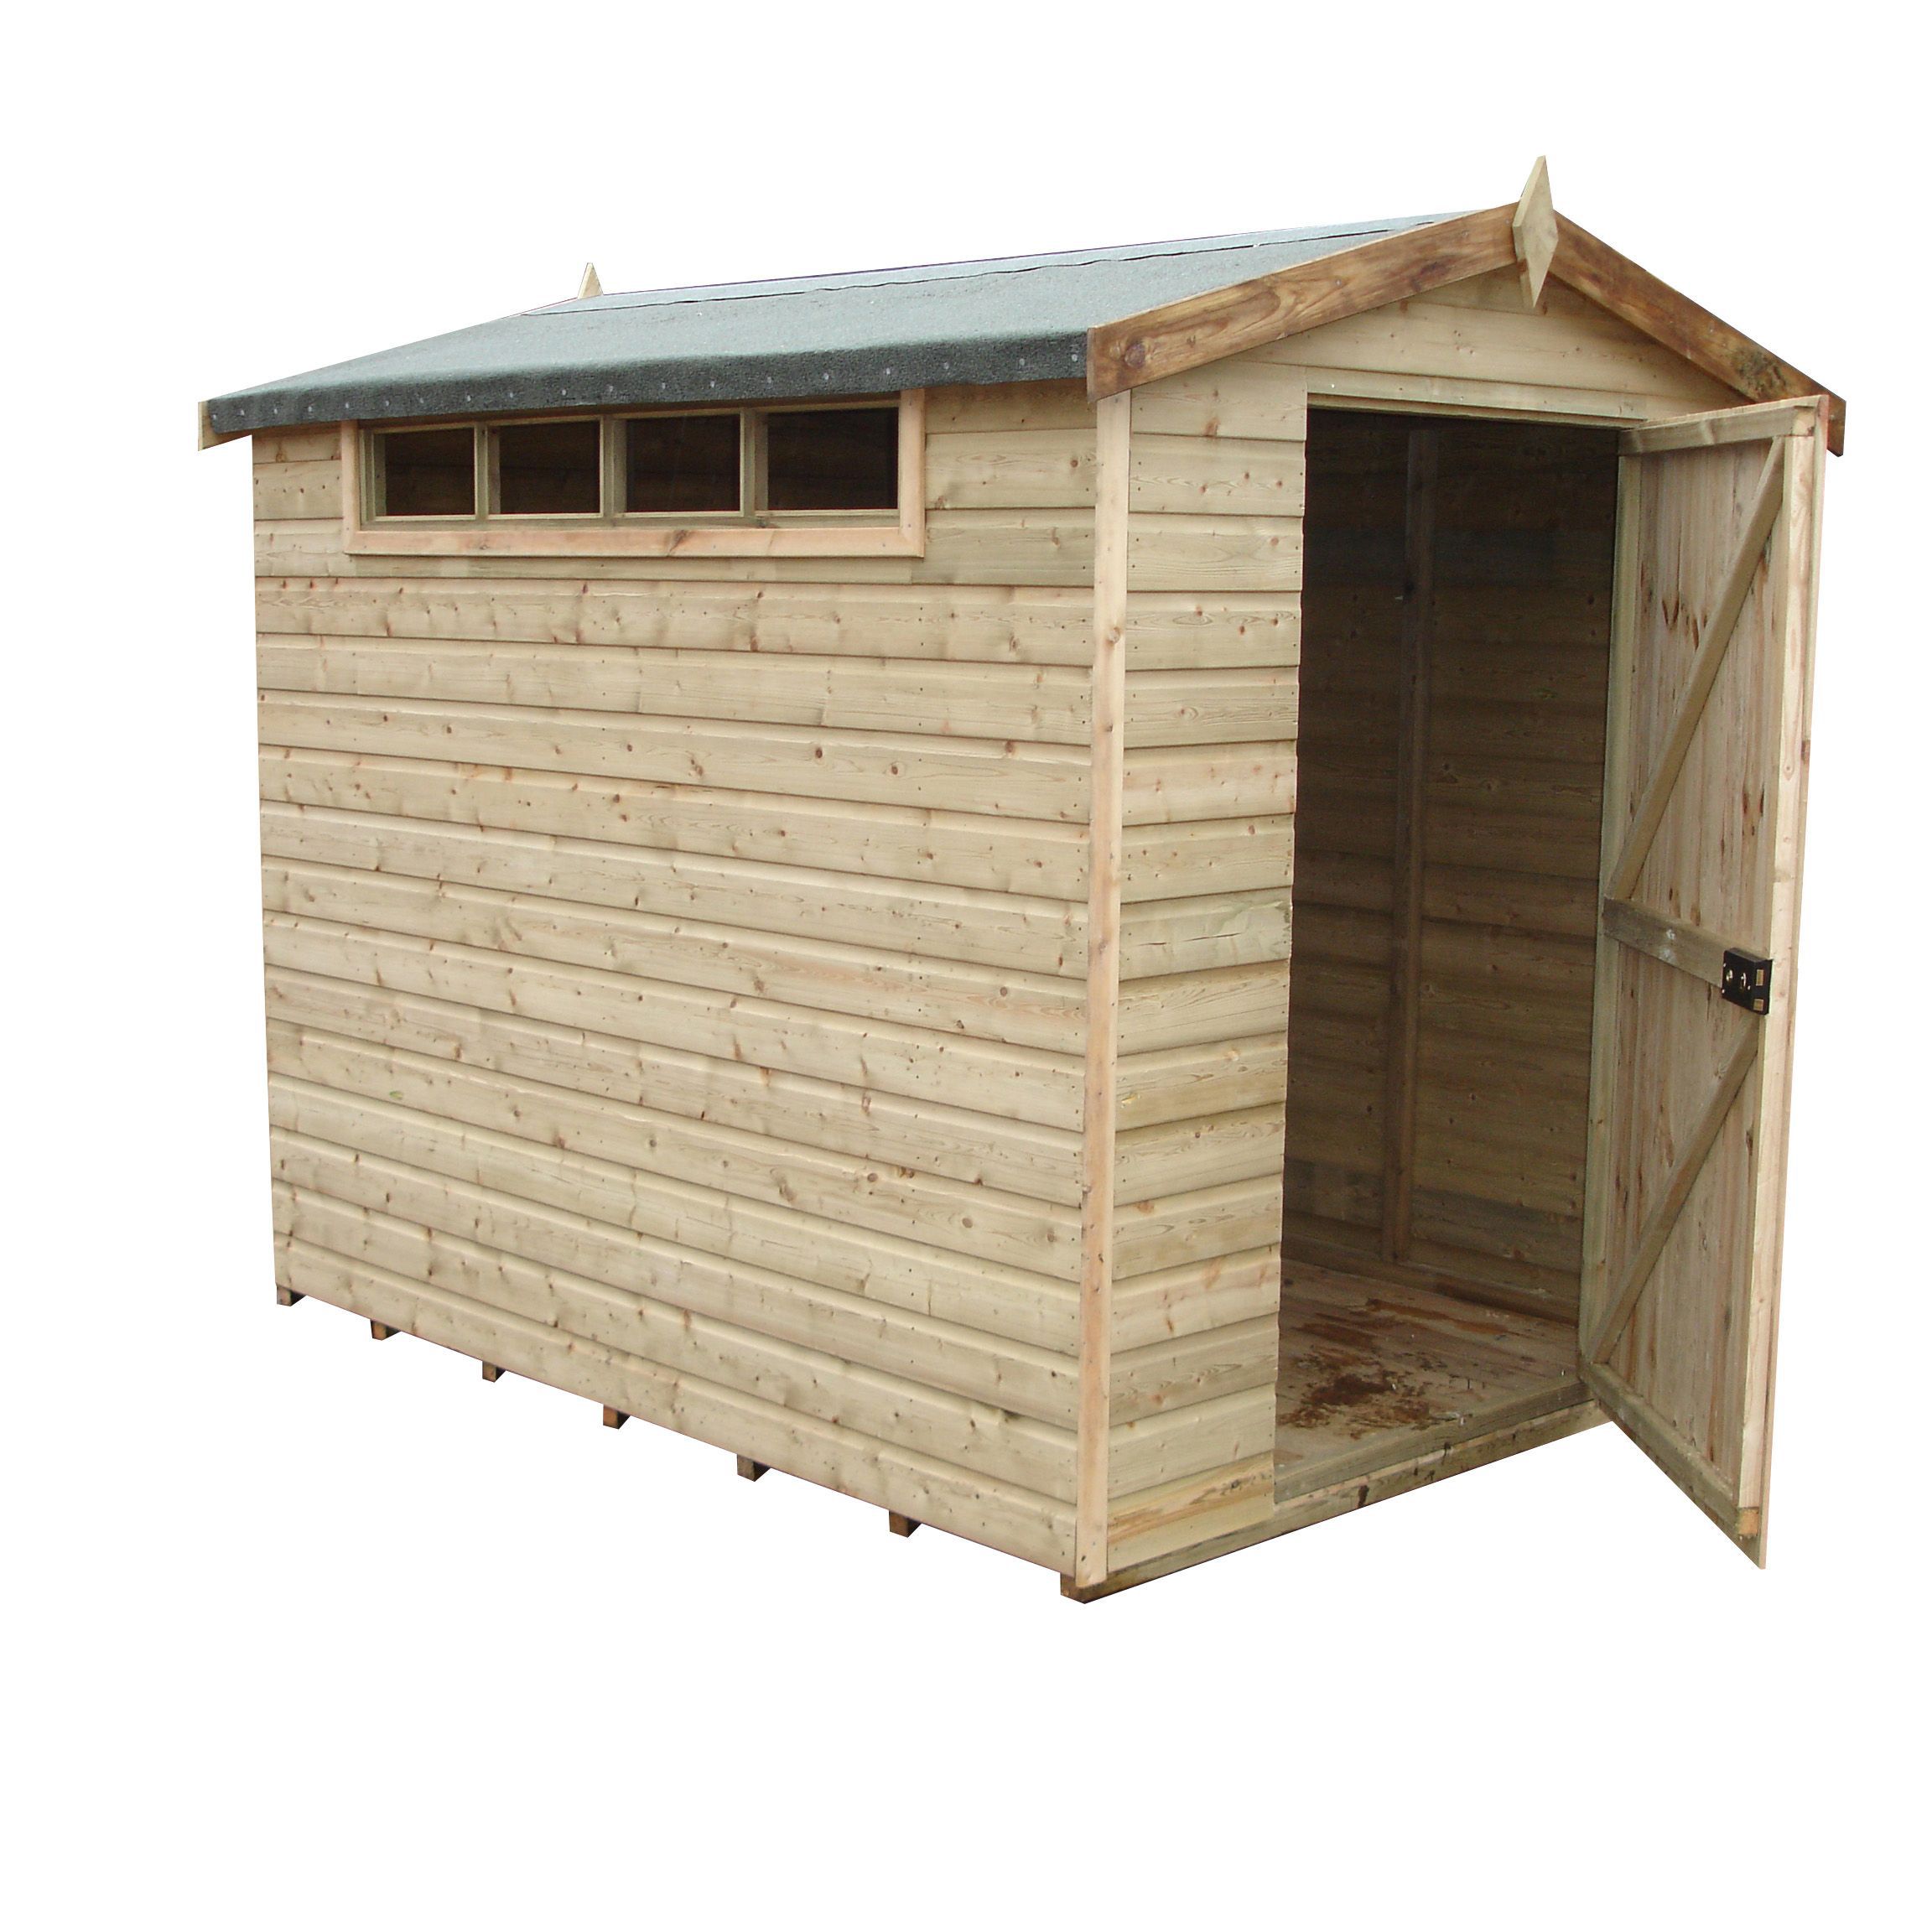 Shire 10x10 Apex Shed - Base not includedAssembly required